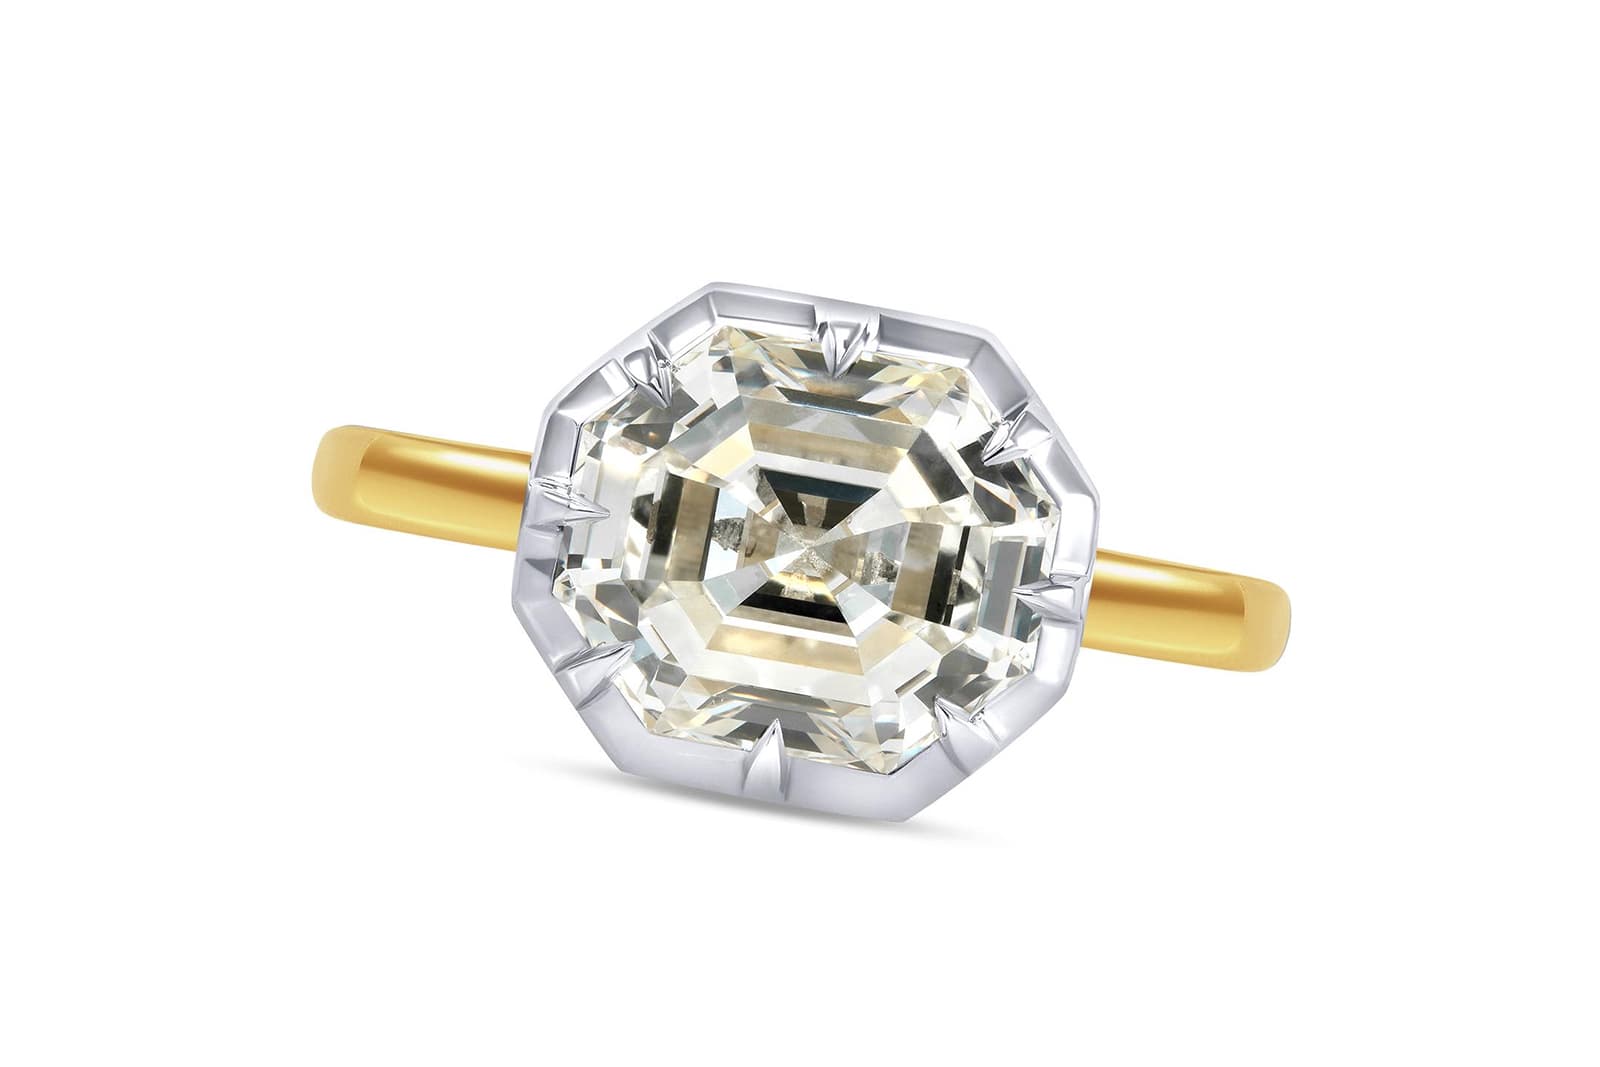 A custom-made antique emerald-cut diamond ring crafted by IceRock Diamonds